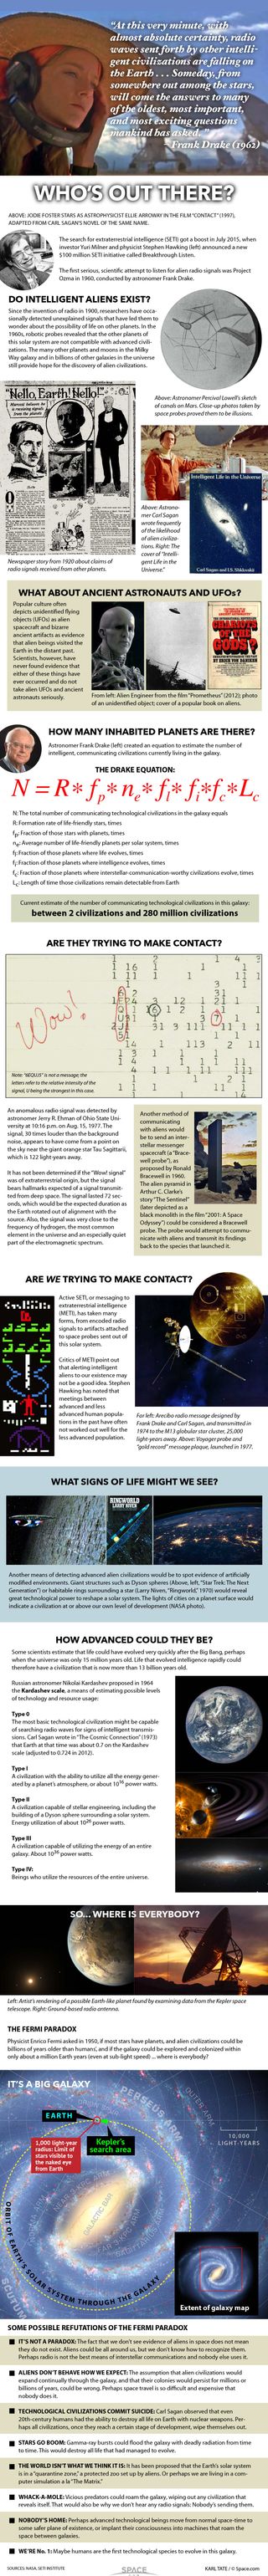 Are we the only intelligent life in the universe? See how we intend to find out in this full infographic.